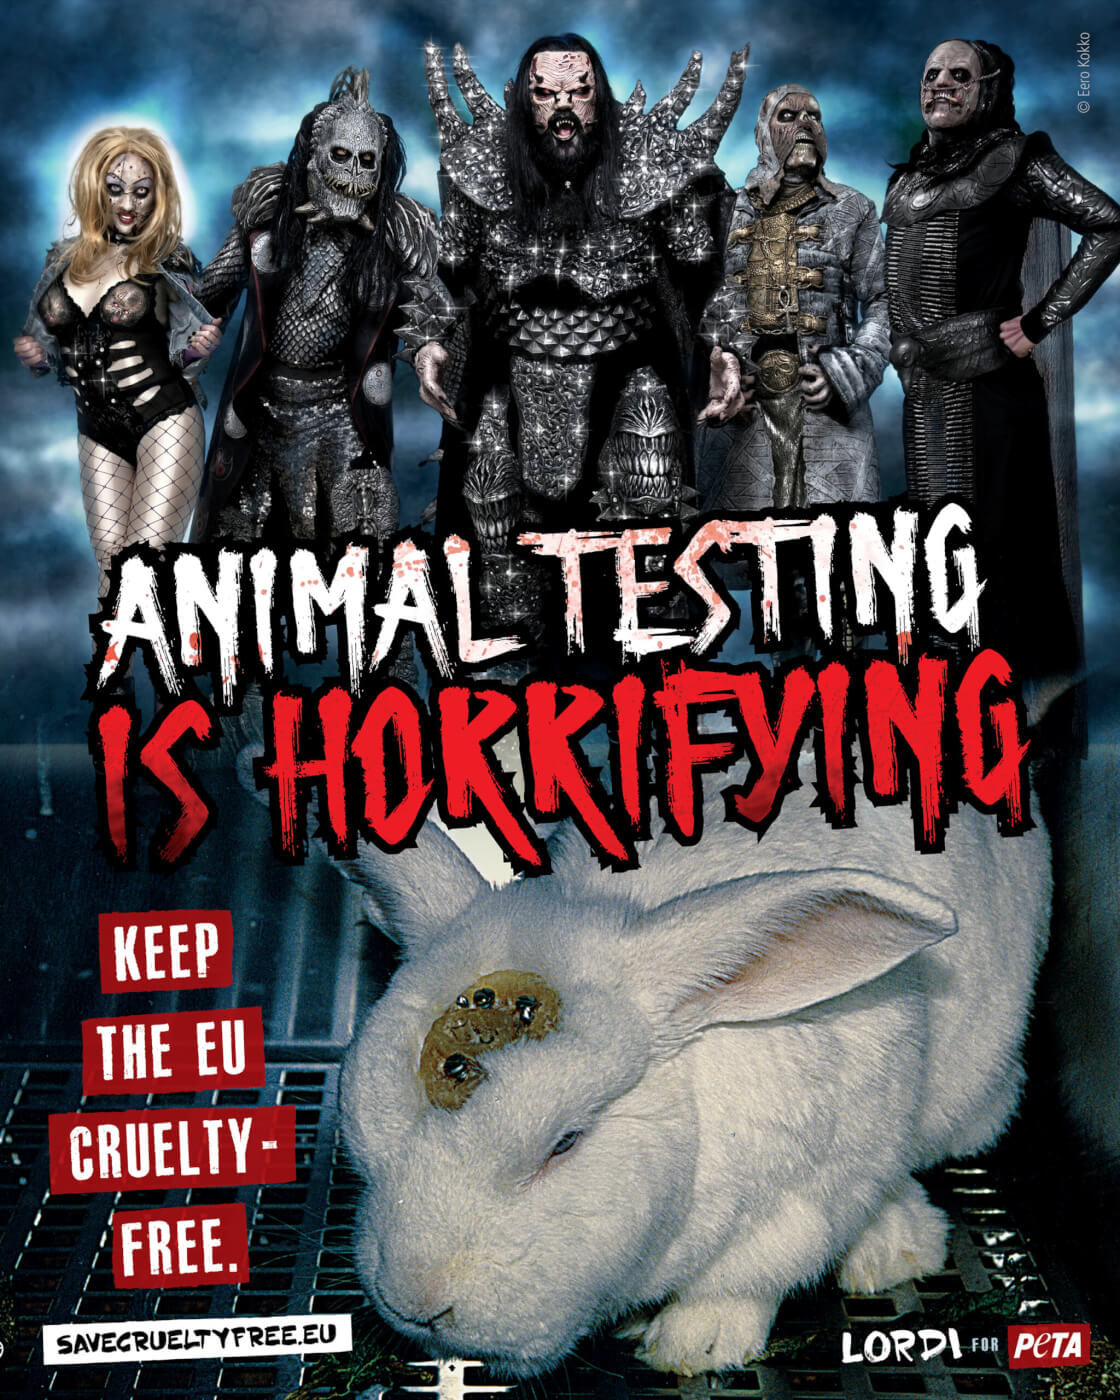 Lordi Bands Together With PETA to Condemn 'Monstrous' Tests on Animals